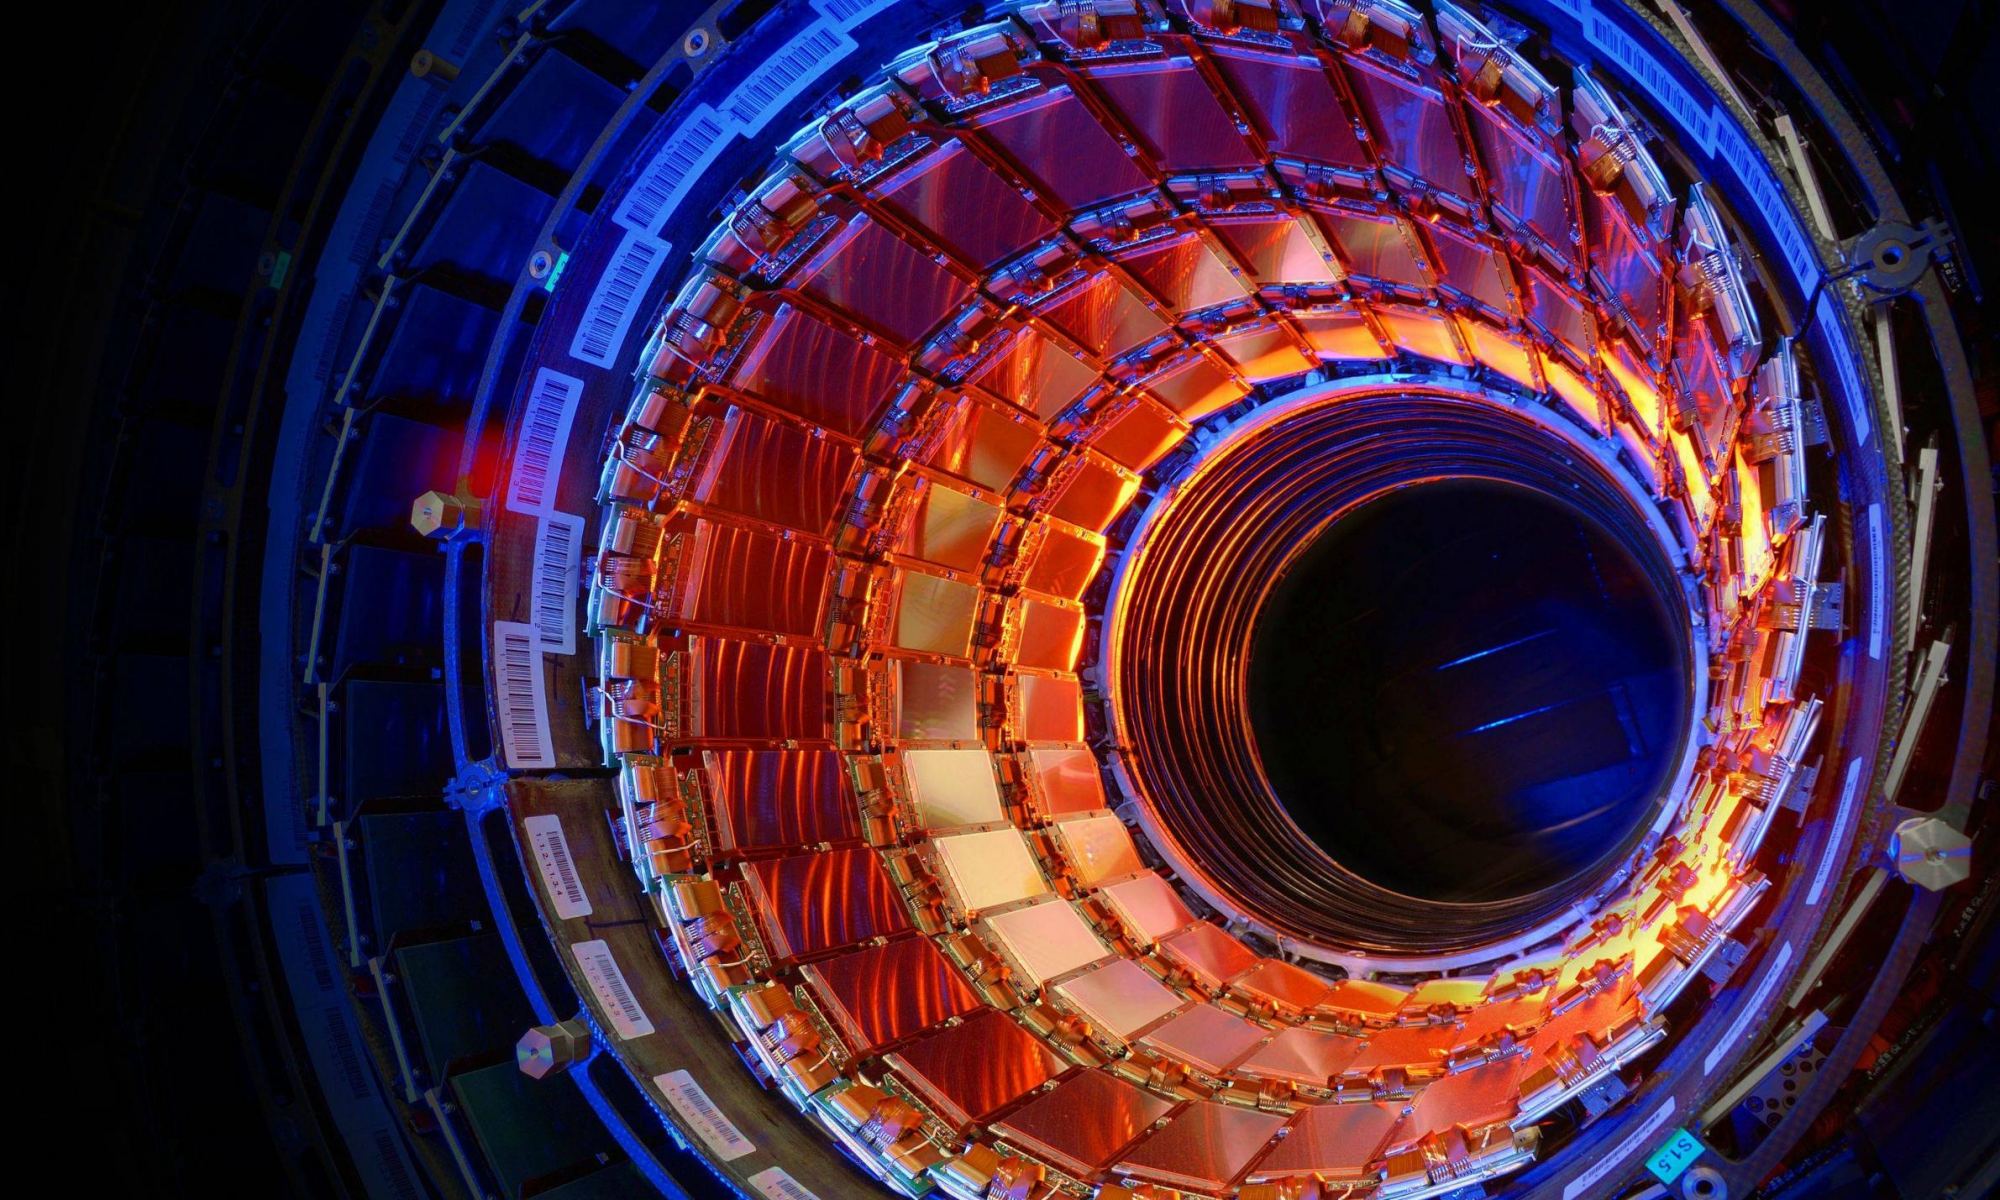 The Compact Muon Solenoid Detector on the LHC. Image Credit: CERN